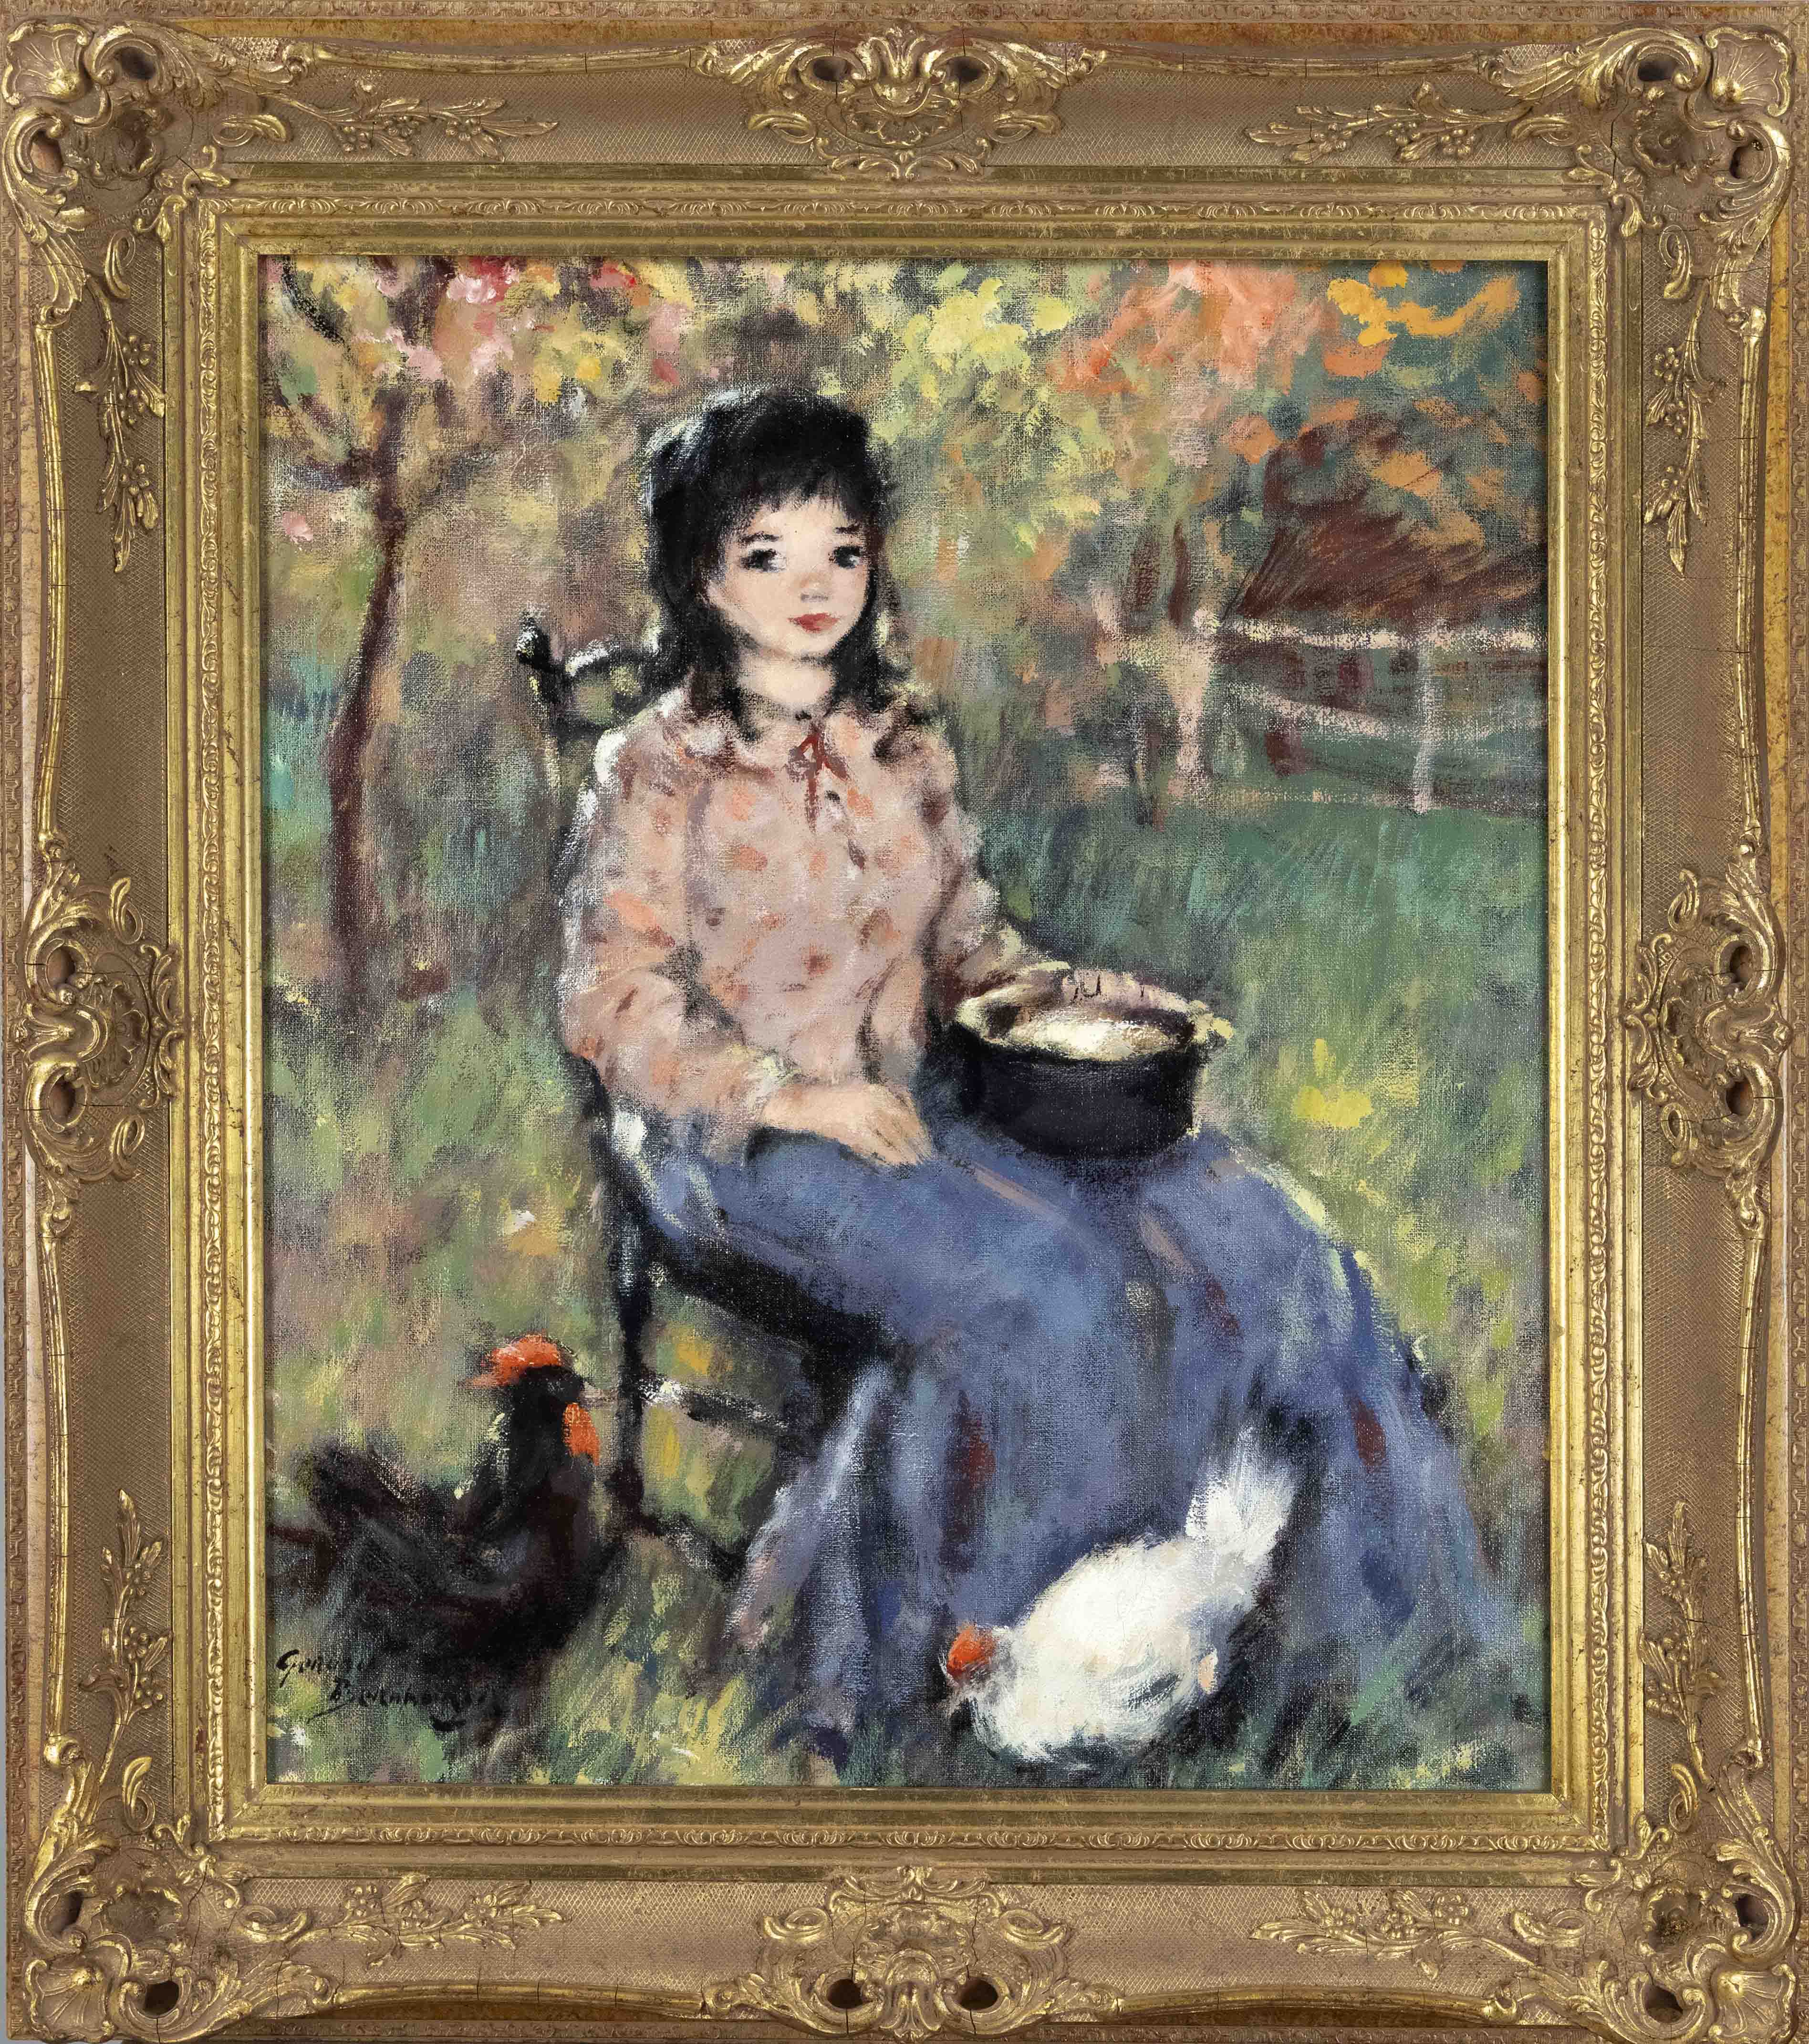 signed Gerard Bernhard, mid 20th century, Girl sitting in a garden with chickens, oil on canvas,